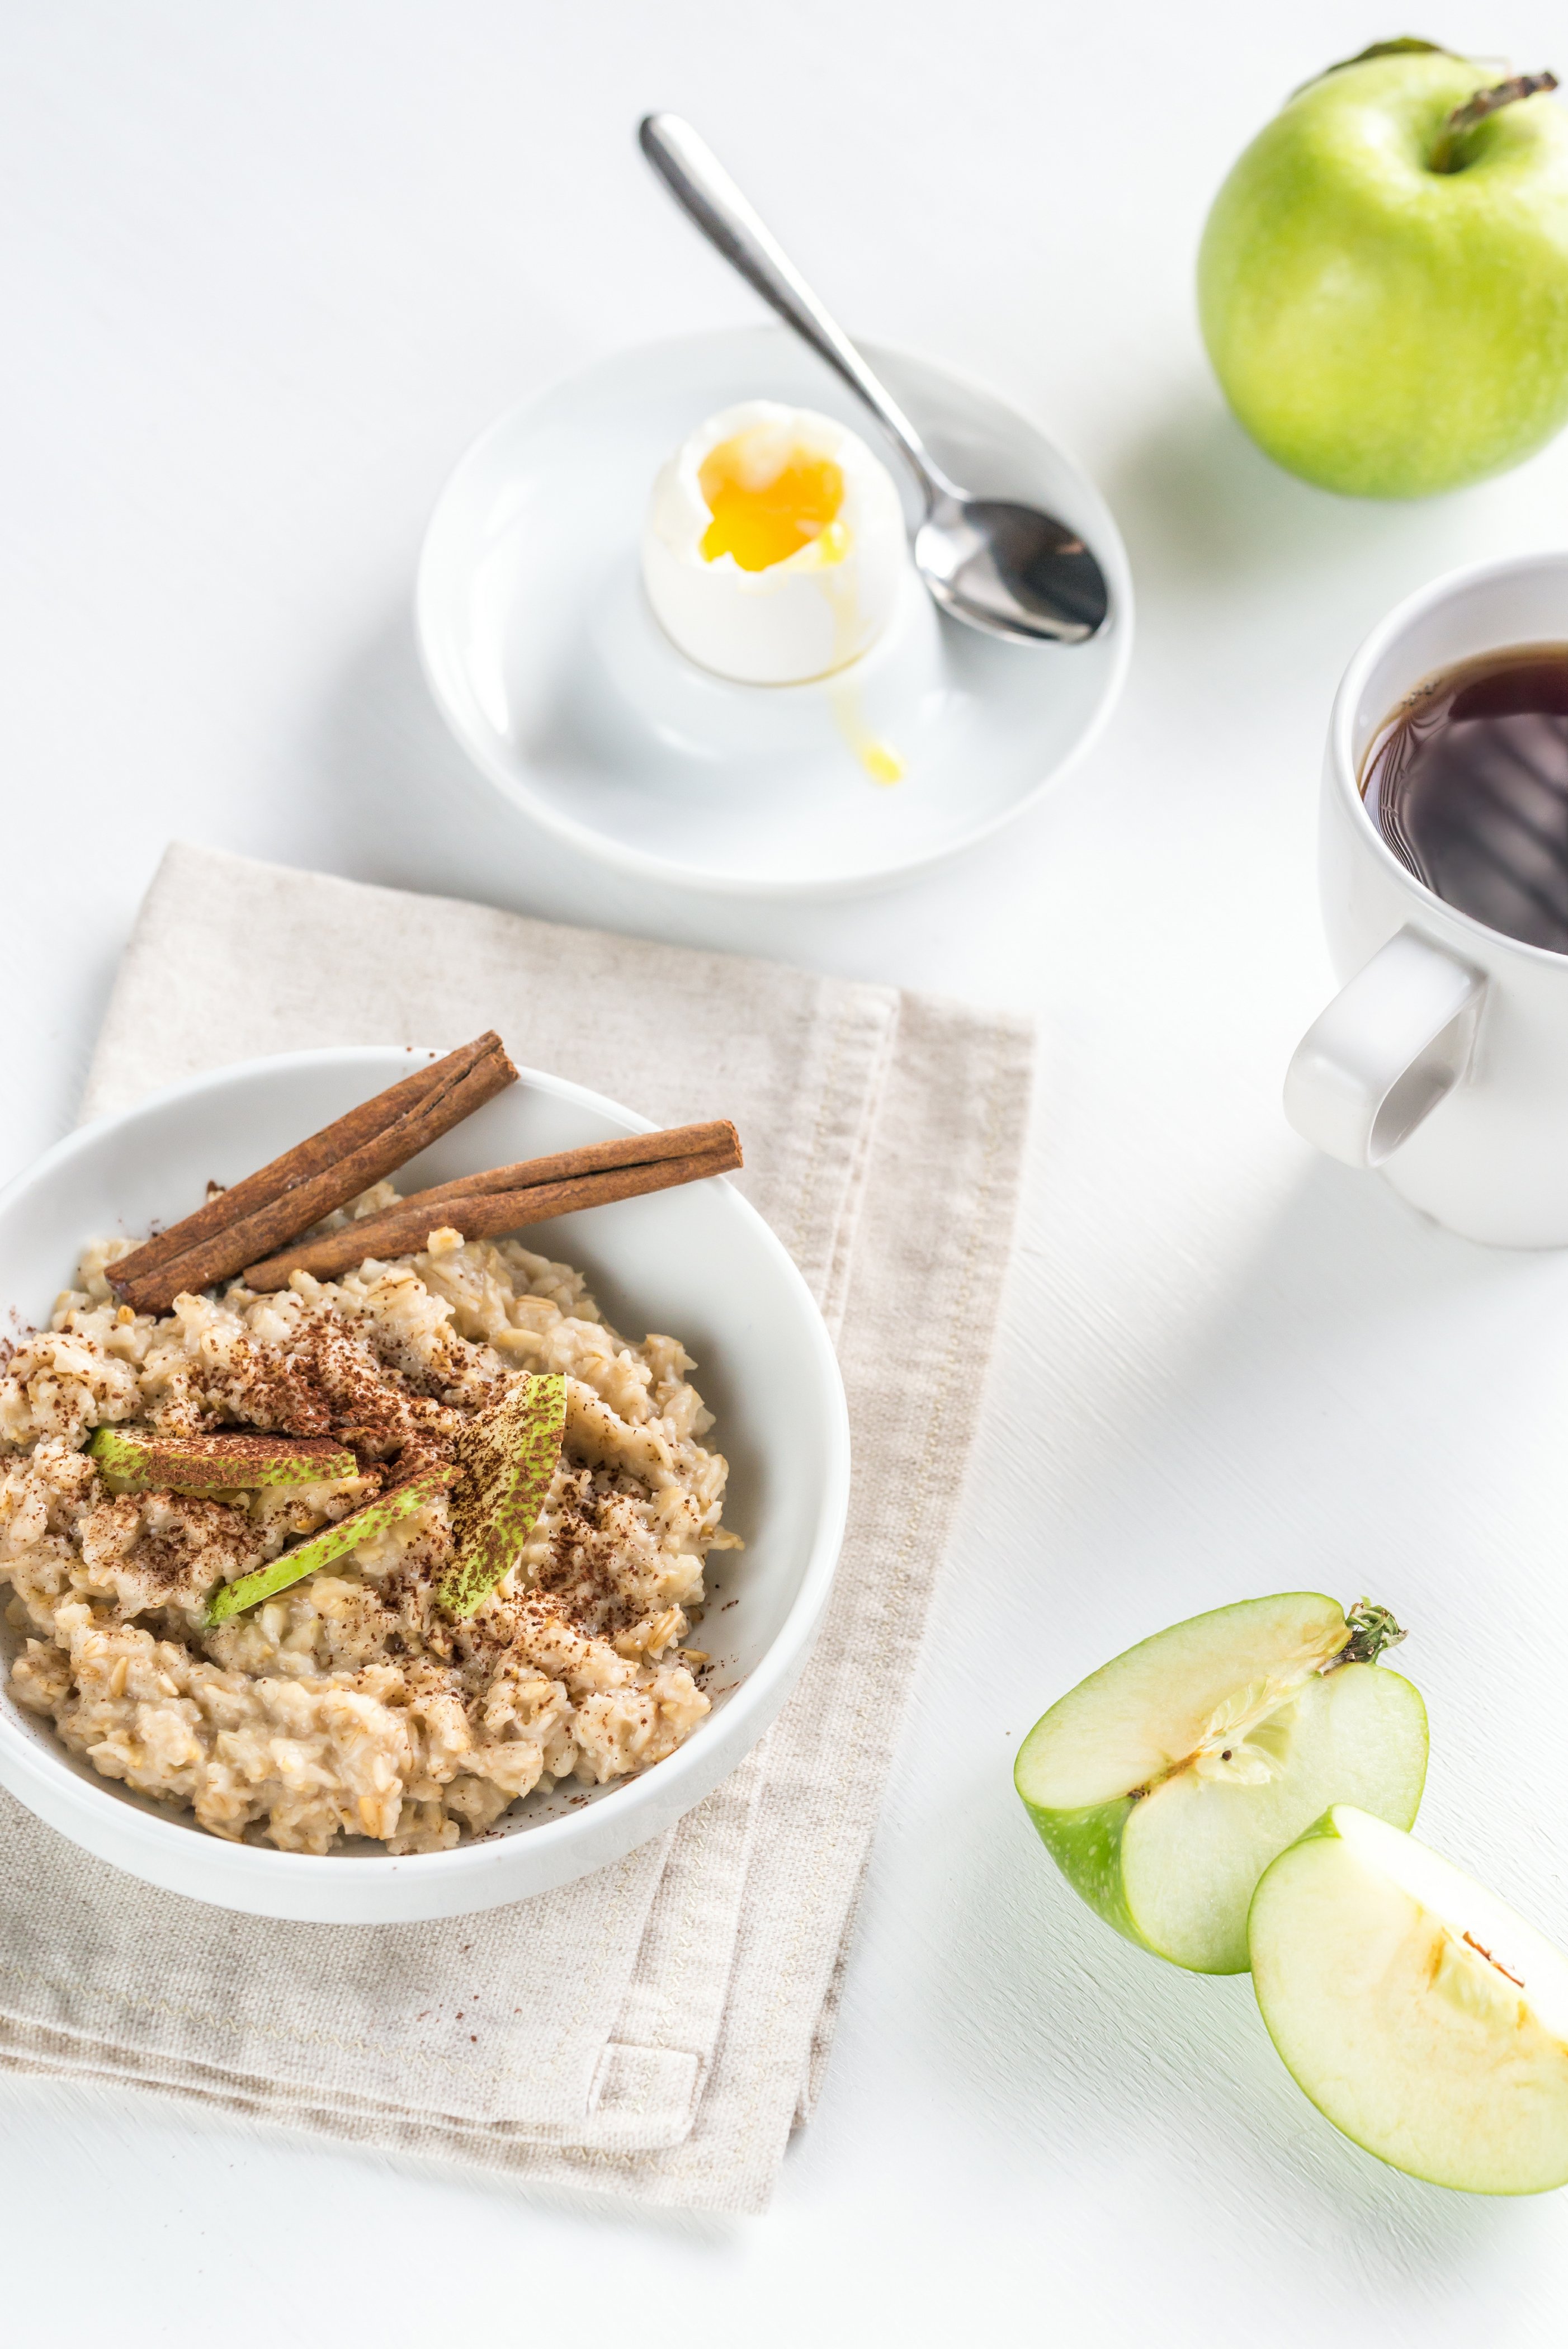 oats-with-egg-and-green-apple-PUMS3PU